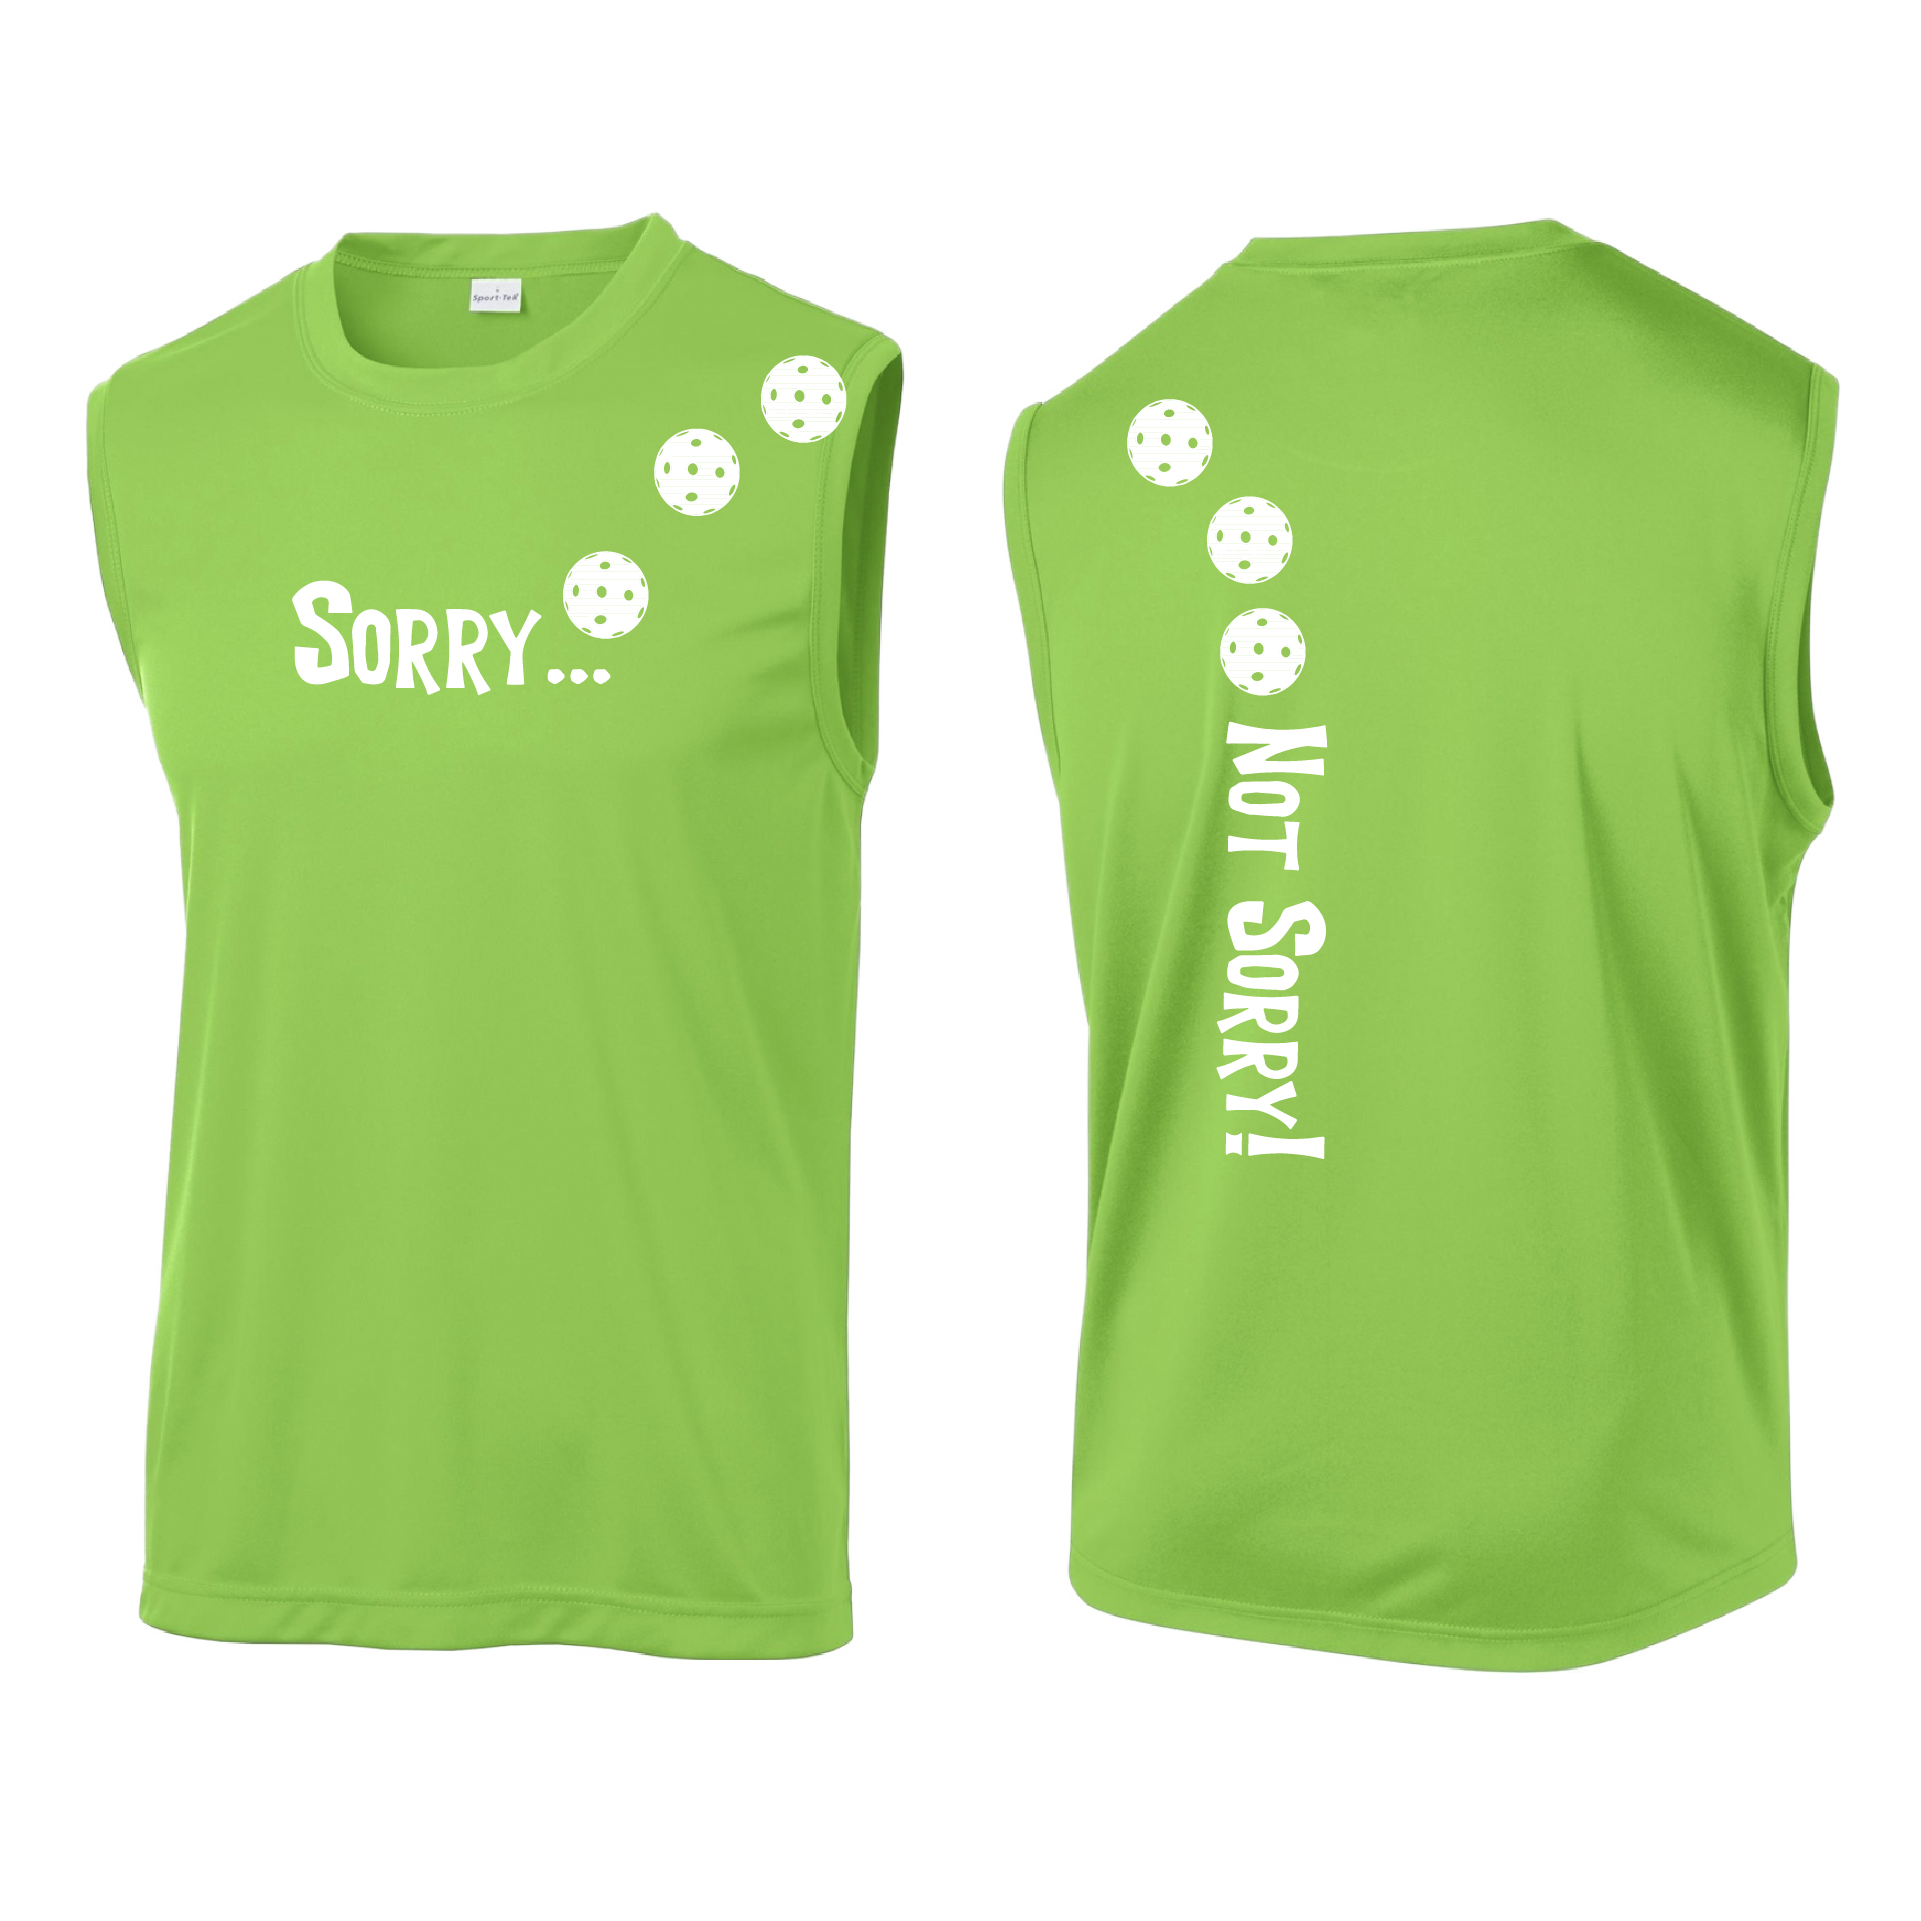 Design: Sorry...Not Sorry! with Customizable Ball Color - Choose: Yellow, White or Cyan.   Men's Styles: Sleeveless  Shirts are lightweight, roomy and highly breathable. These moisture-wicking shirts are designed for athletic performance. They feature PosiCharge technology to lock in color and prevent logos from fading. Removable tag and set-in sleeves for comfort.